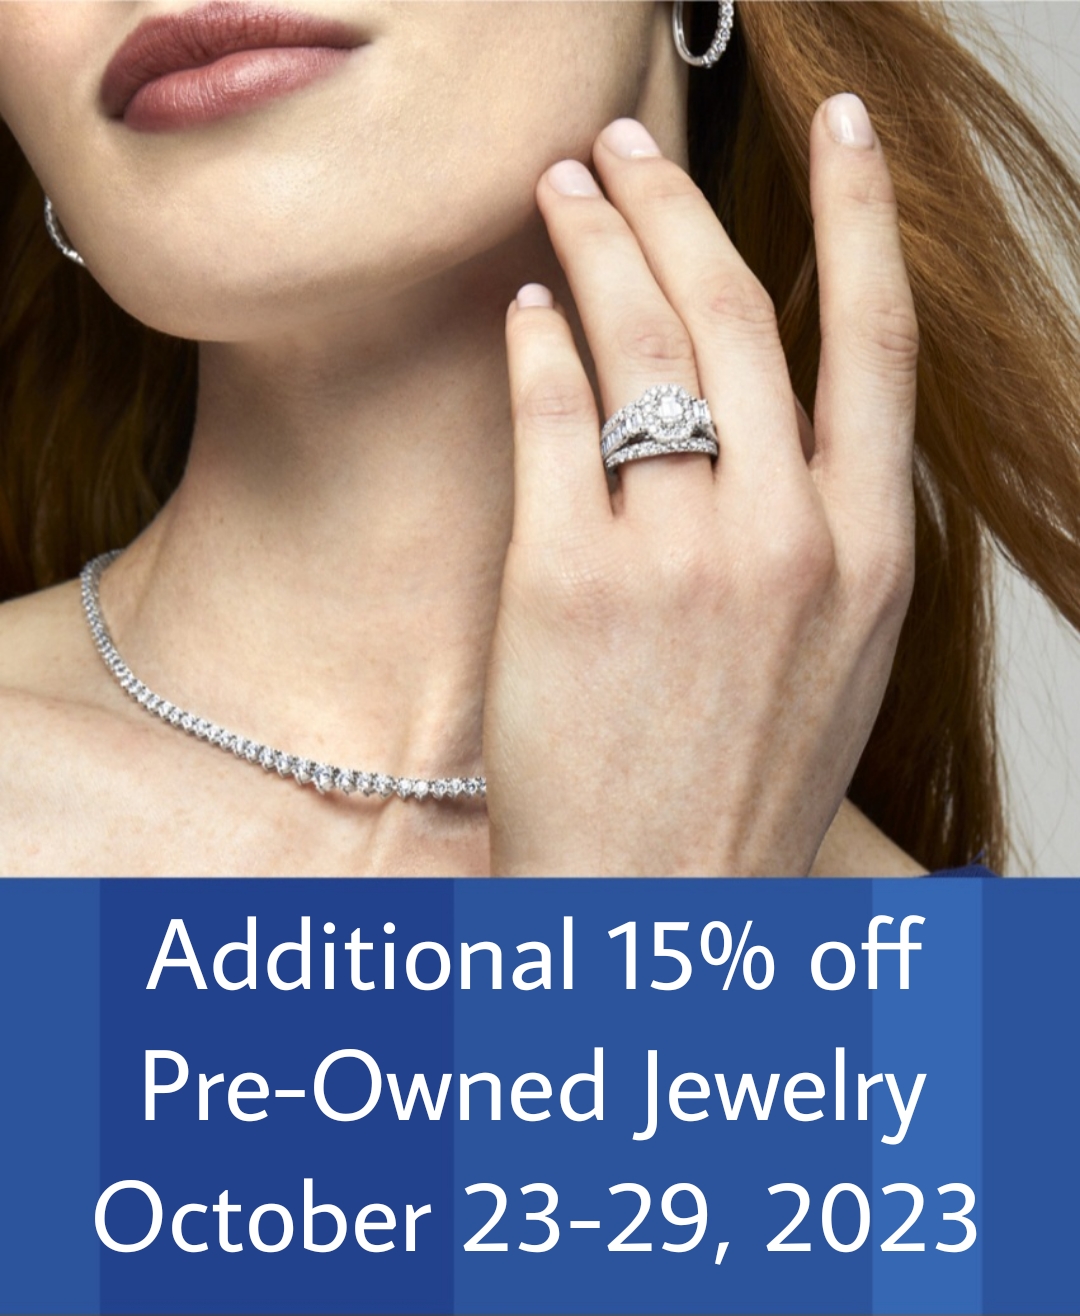 Five Reasons to Buy Pre-Owned Jewelry